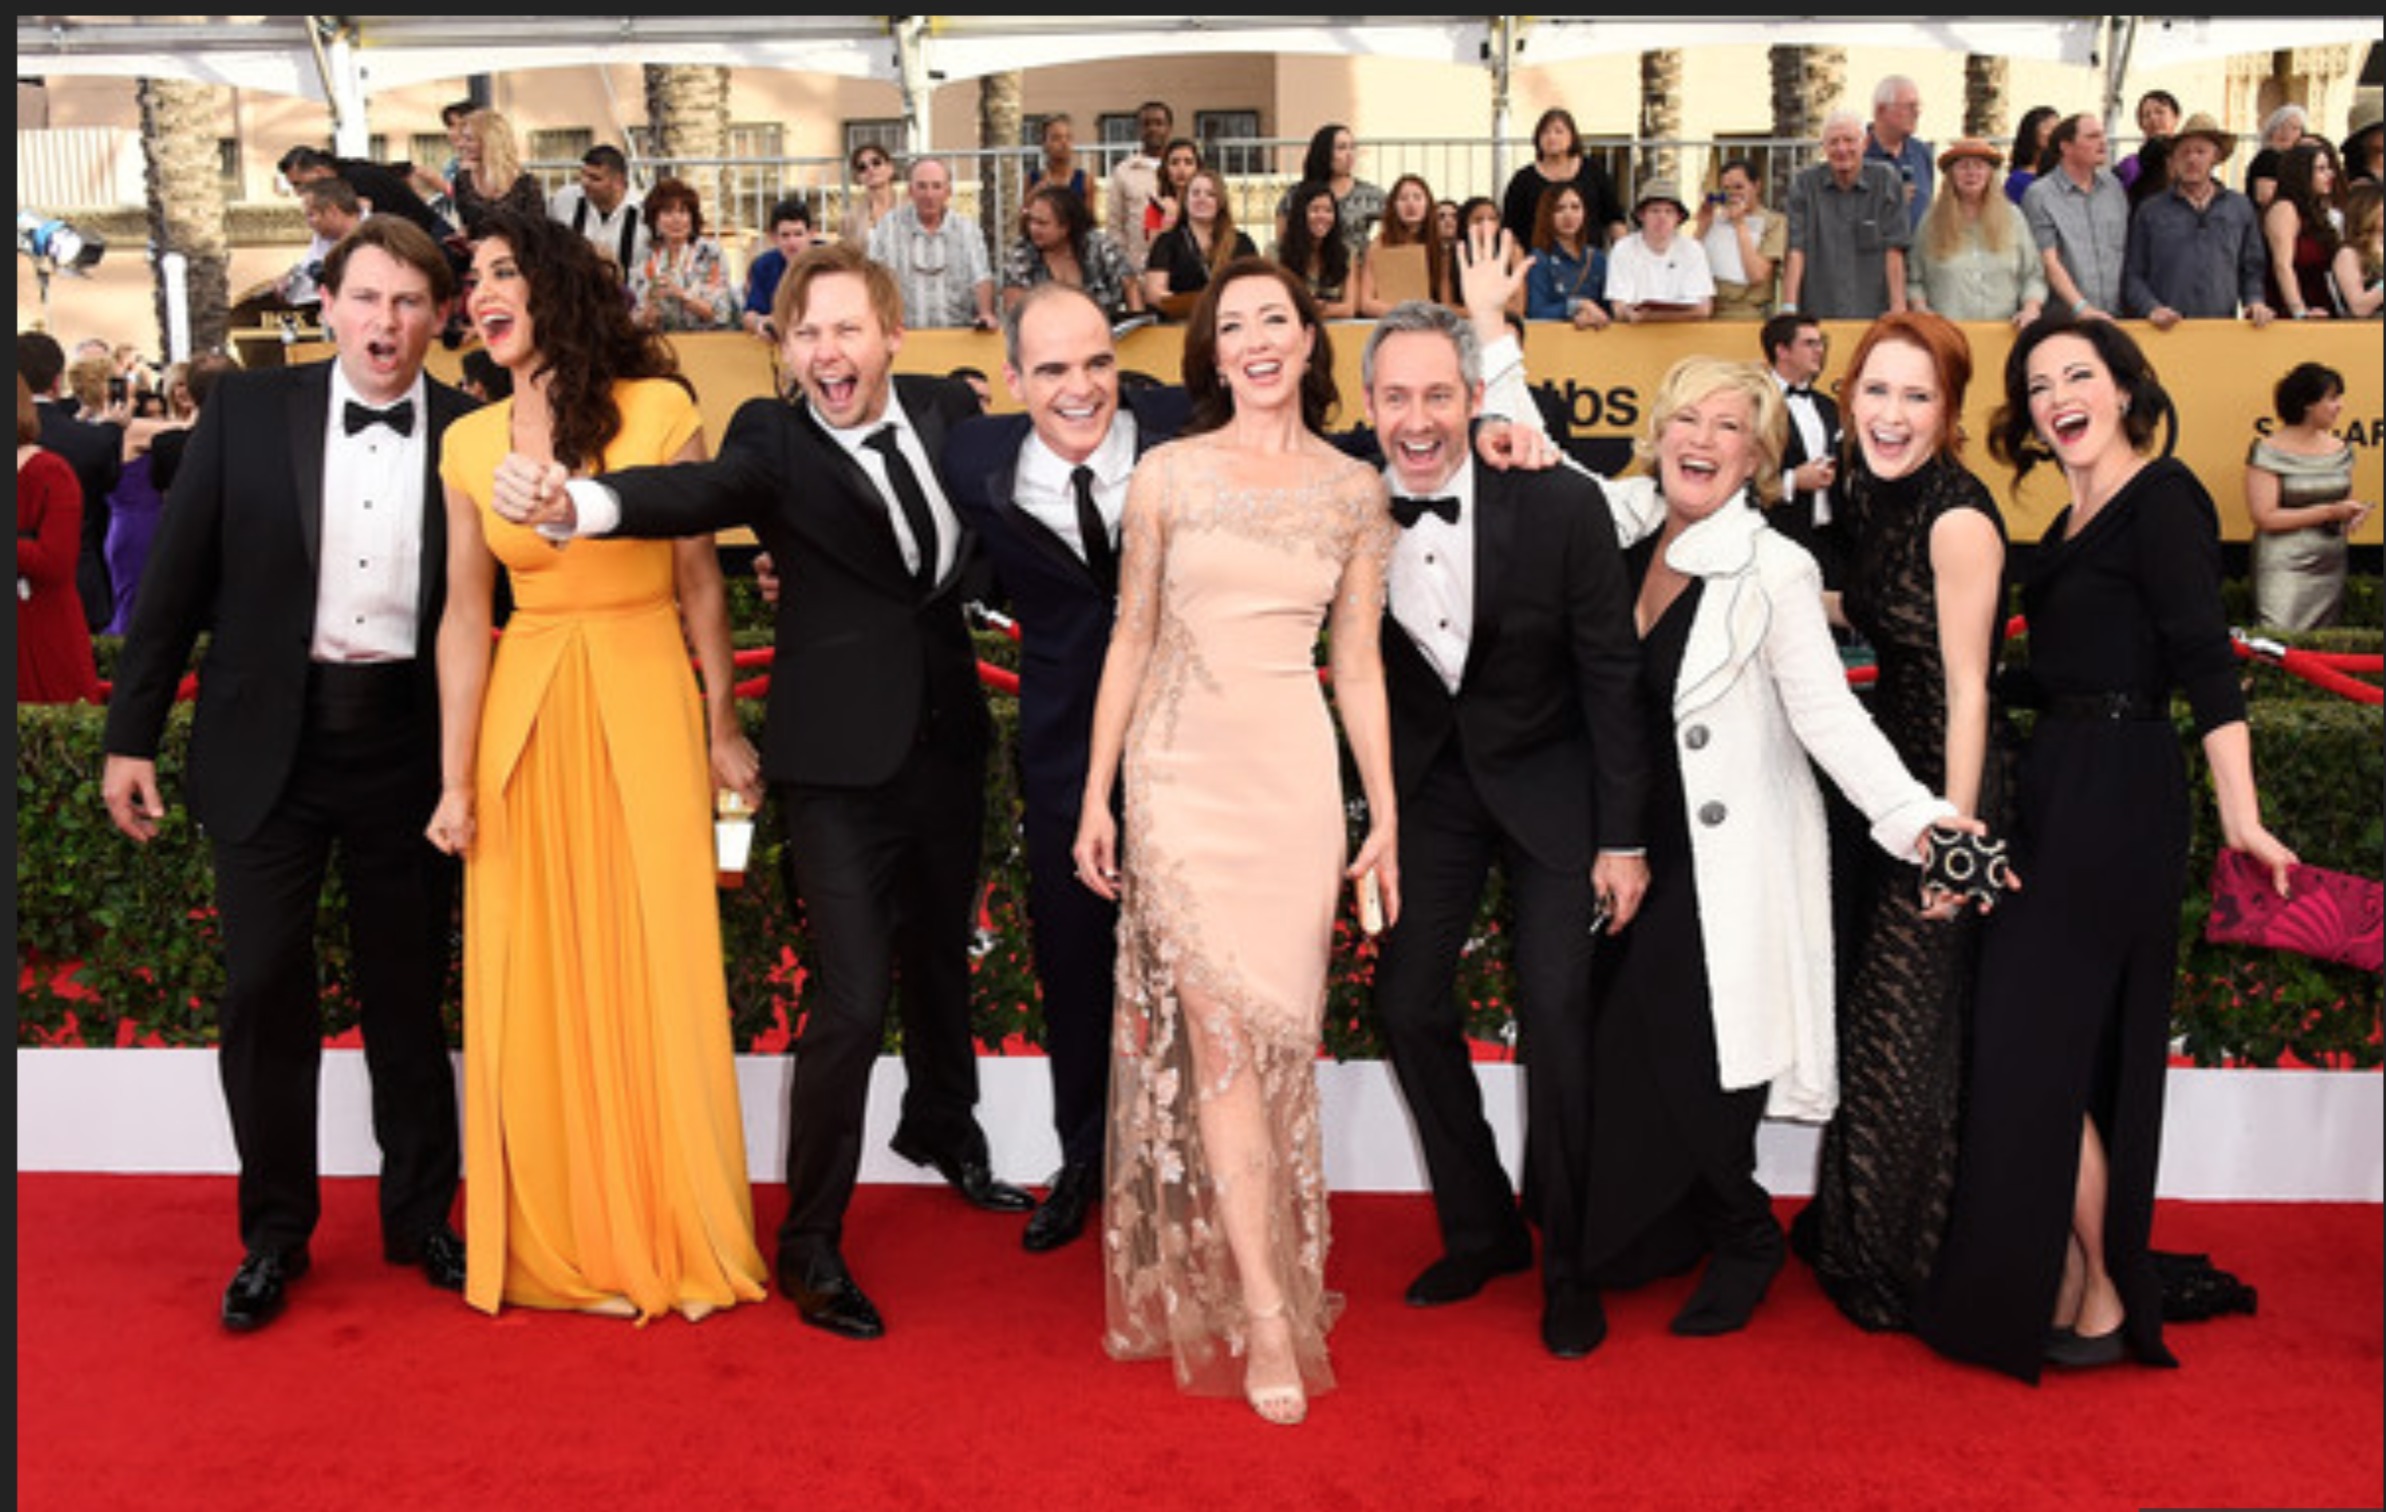 SAG Awards 2015 With cast of House of Cards